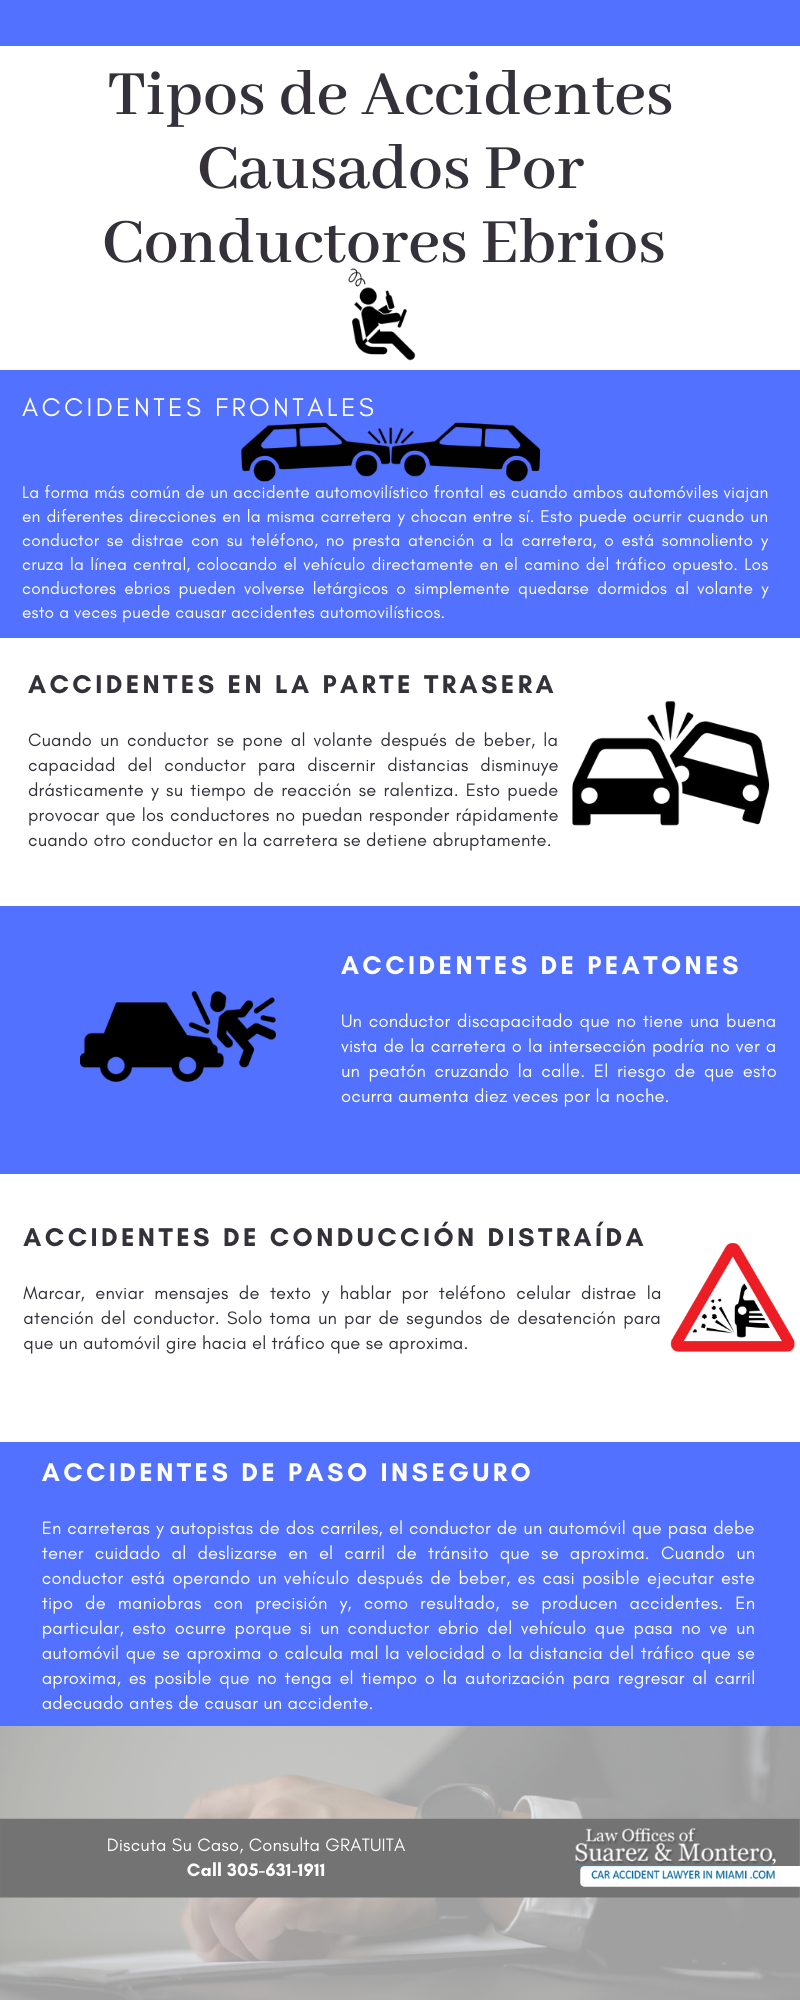 common-types-of-accidents-caused-by-drunk-drivers-spanish